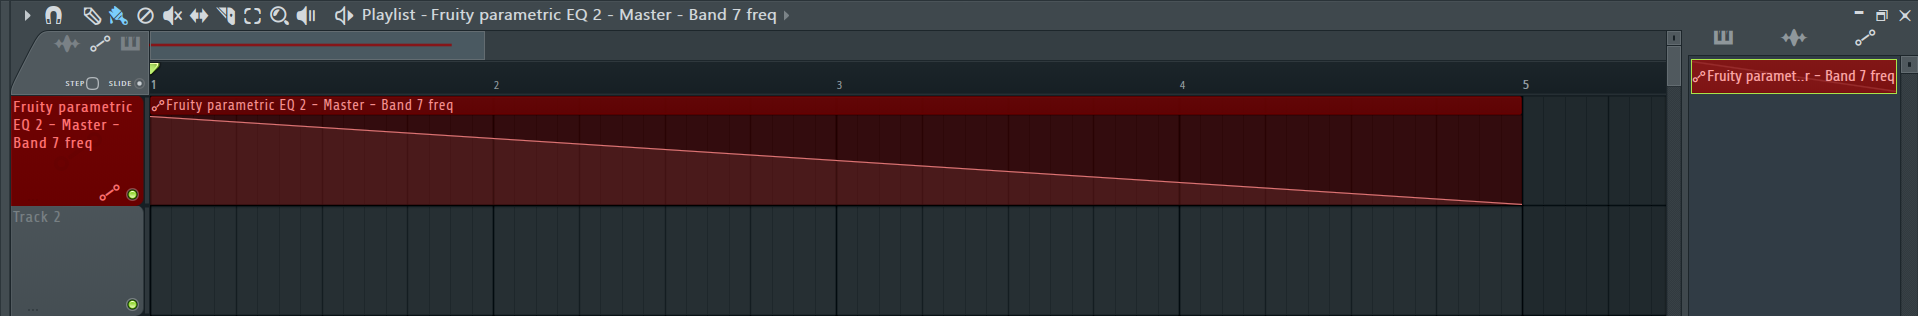 How to create an automation clip in Image-Line's FL Studio DAW - IMG4.png